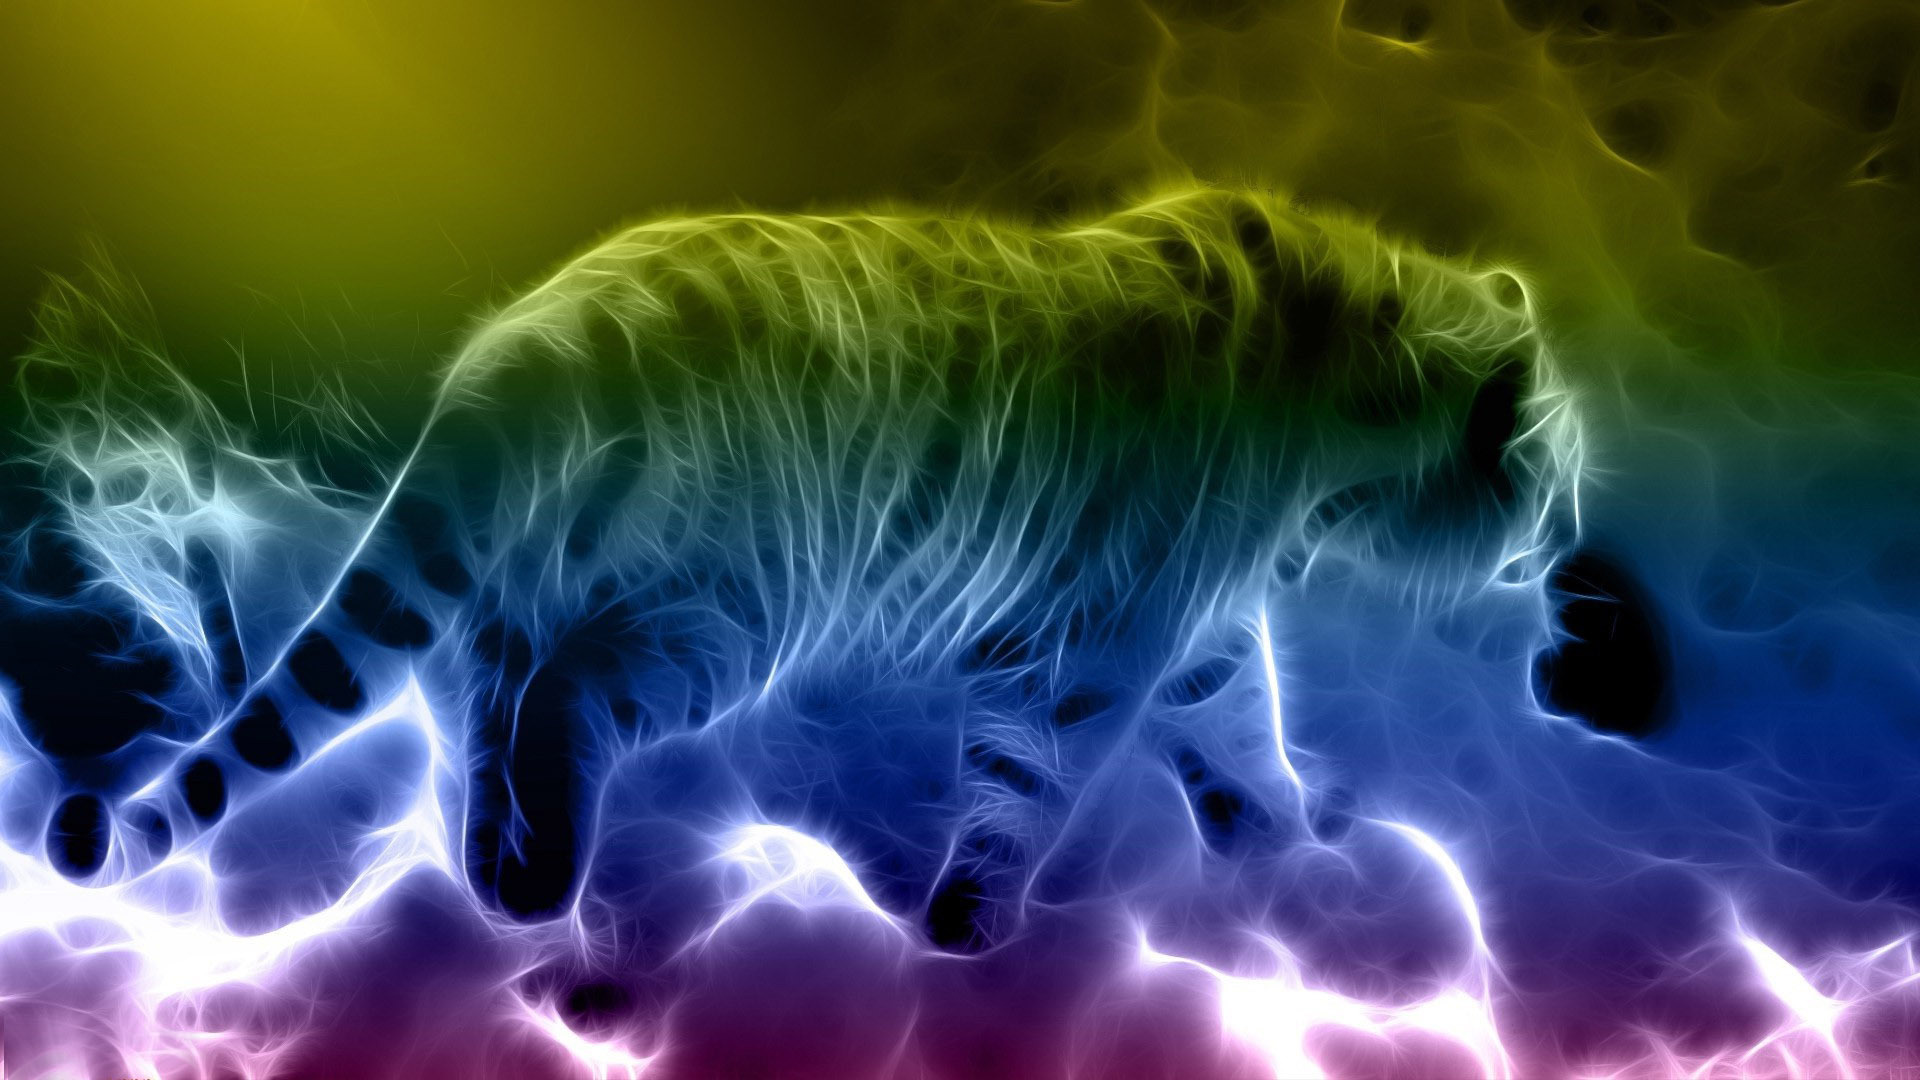 Download neon animal wallpapers gallery. 